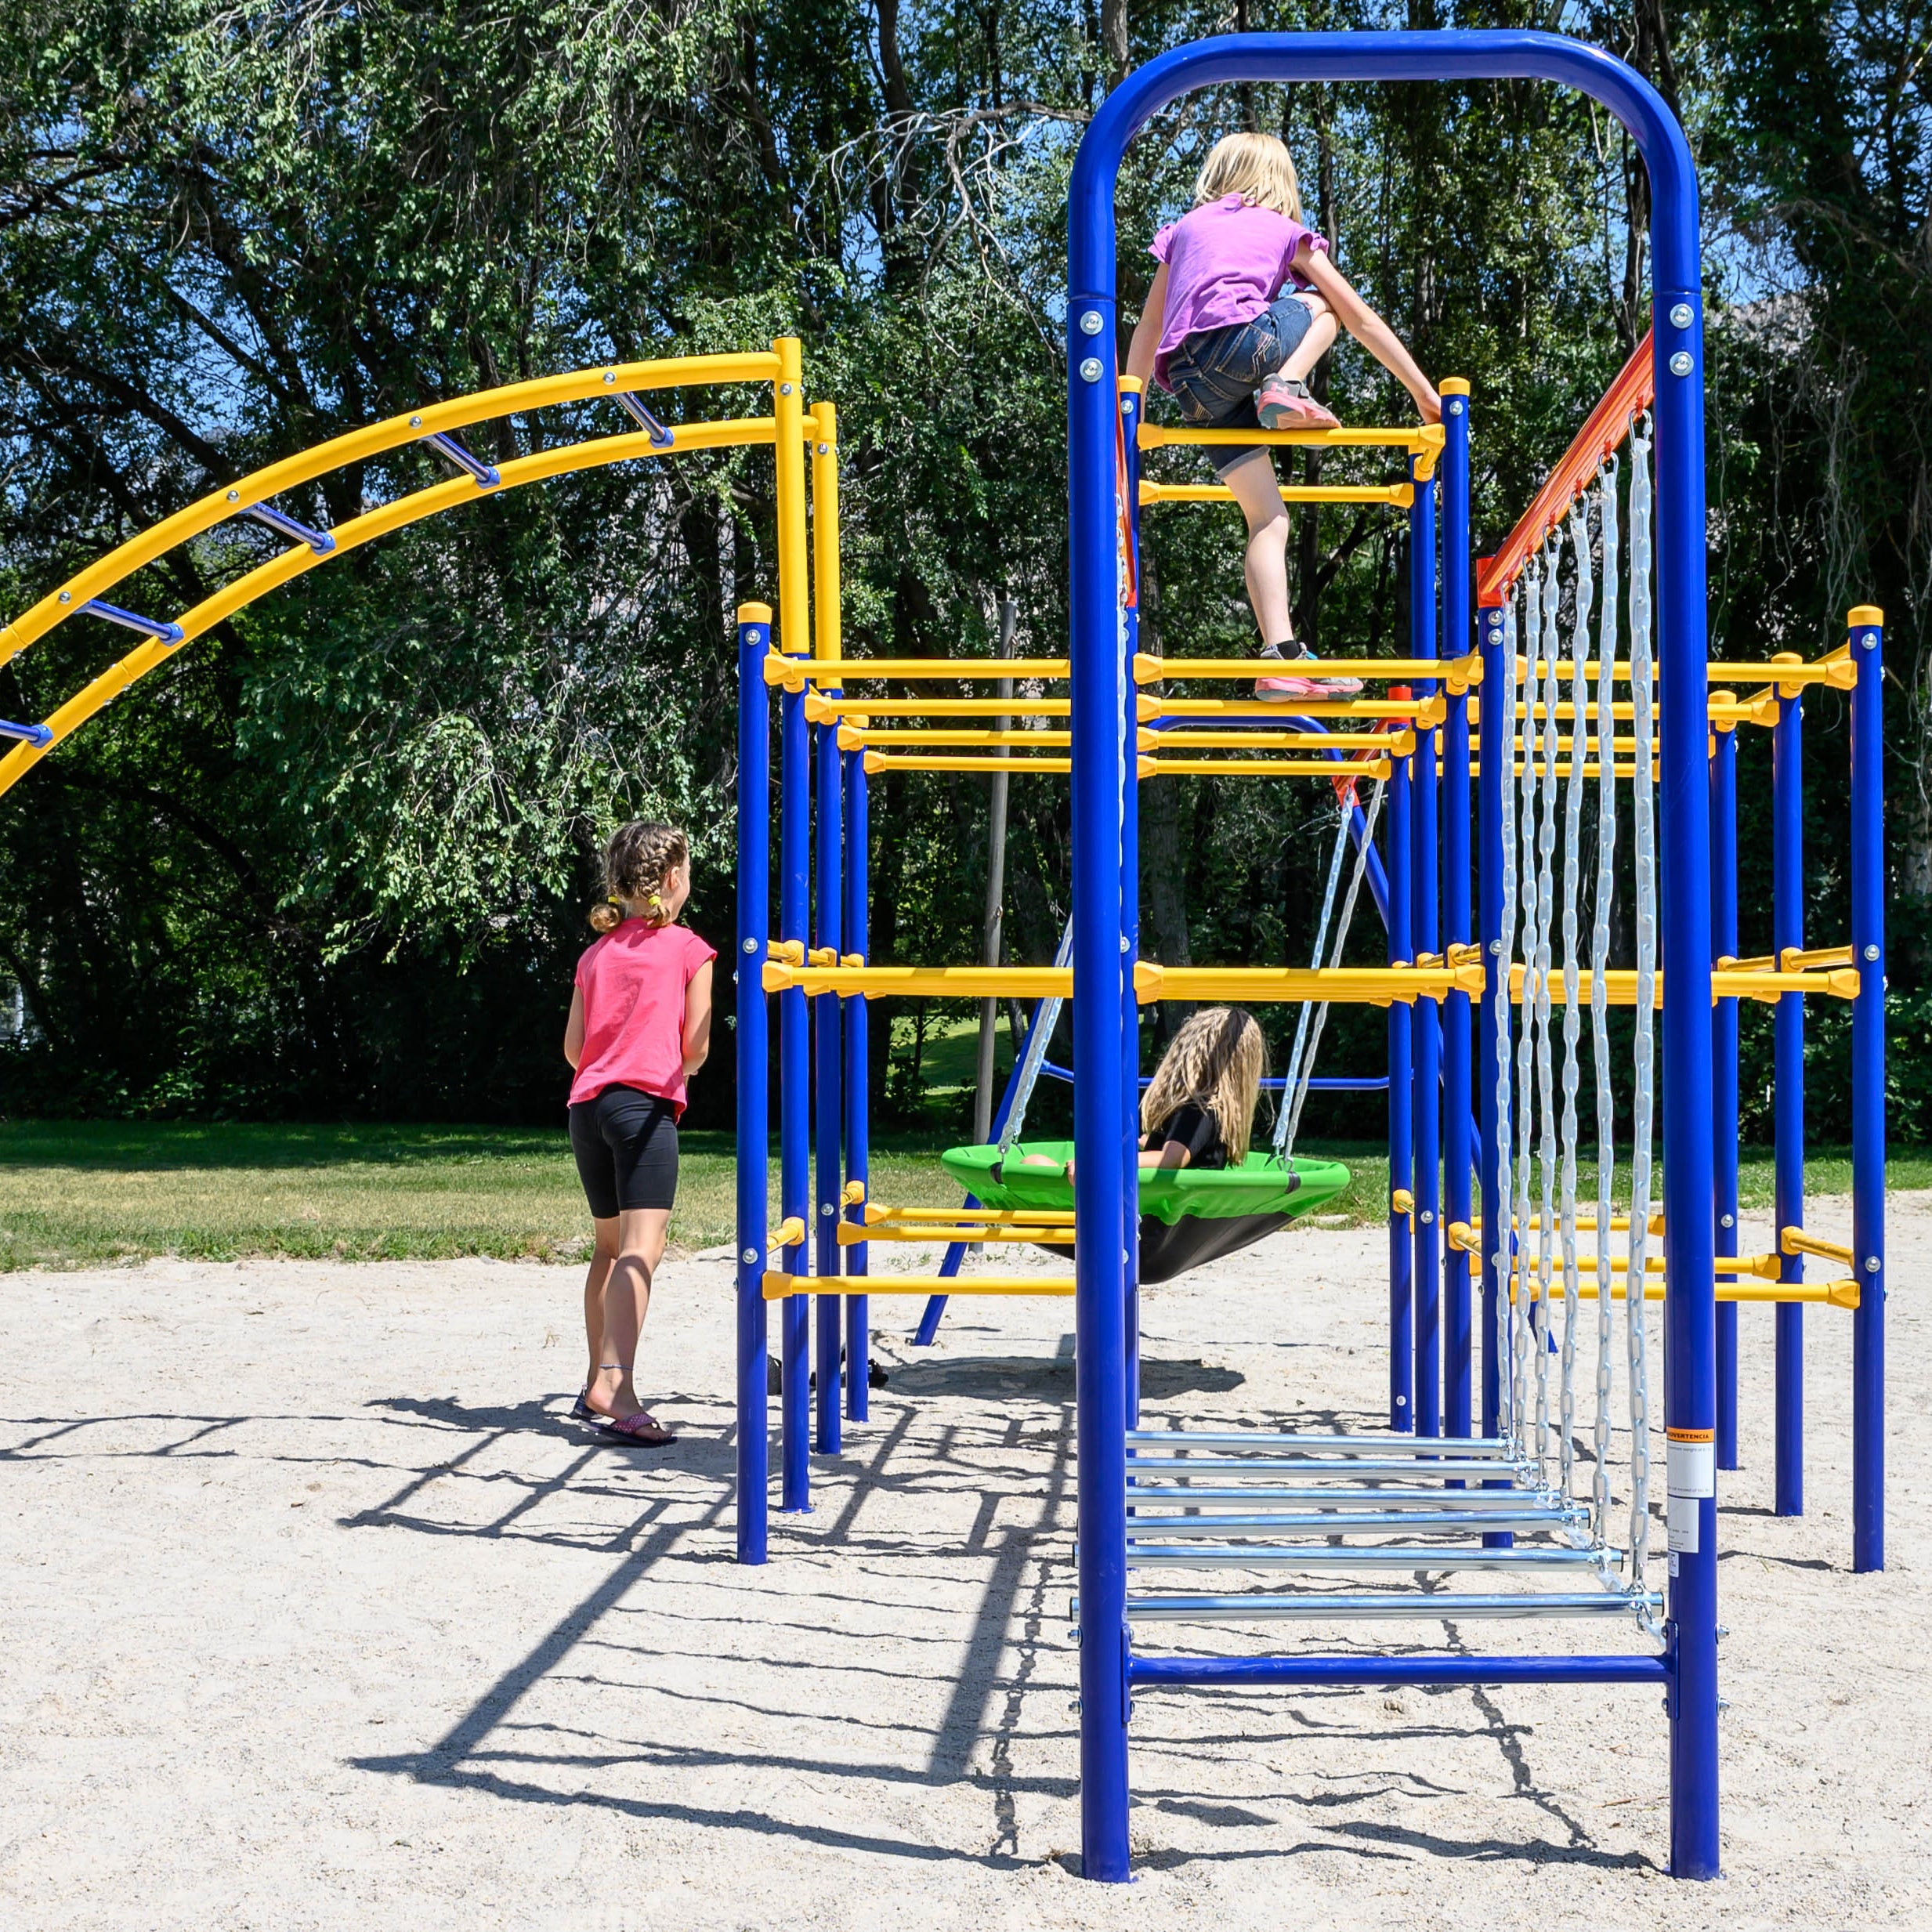 Three young girls climb on the playset that includes the Saucer Swing, Modular Jungle Gym, Hanging Bridge, and Arched Ladder. 